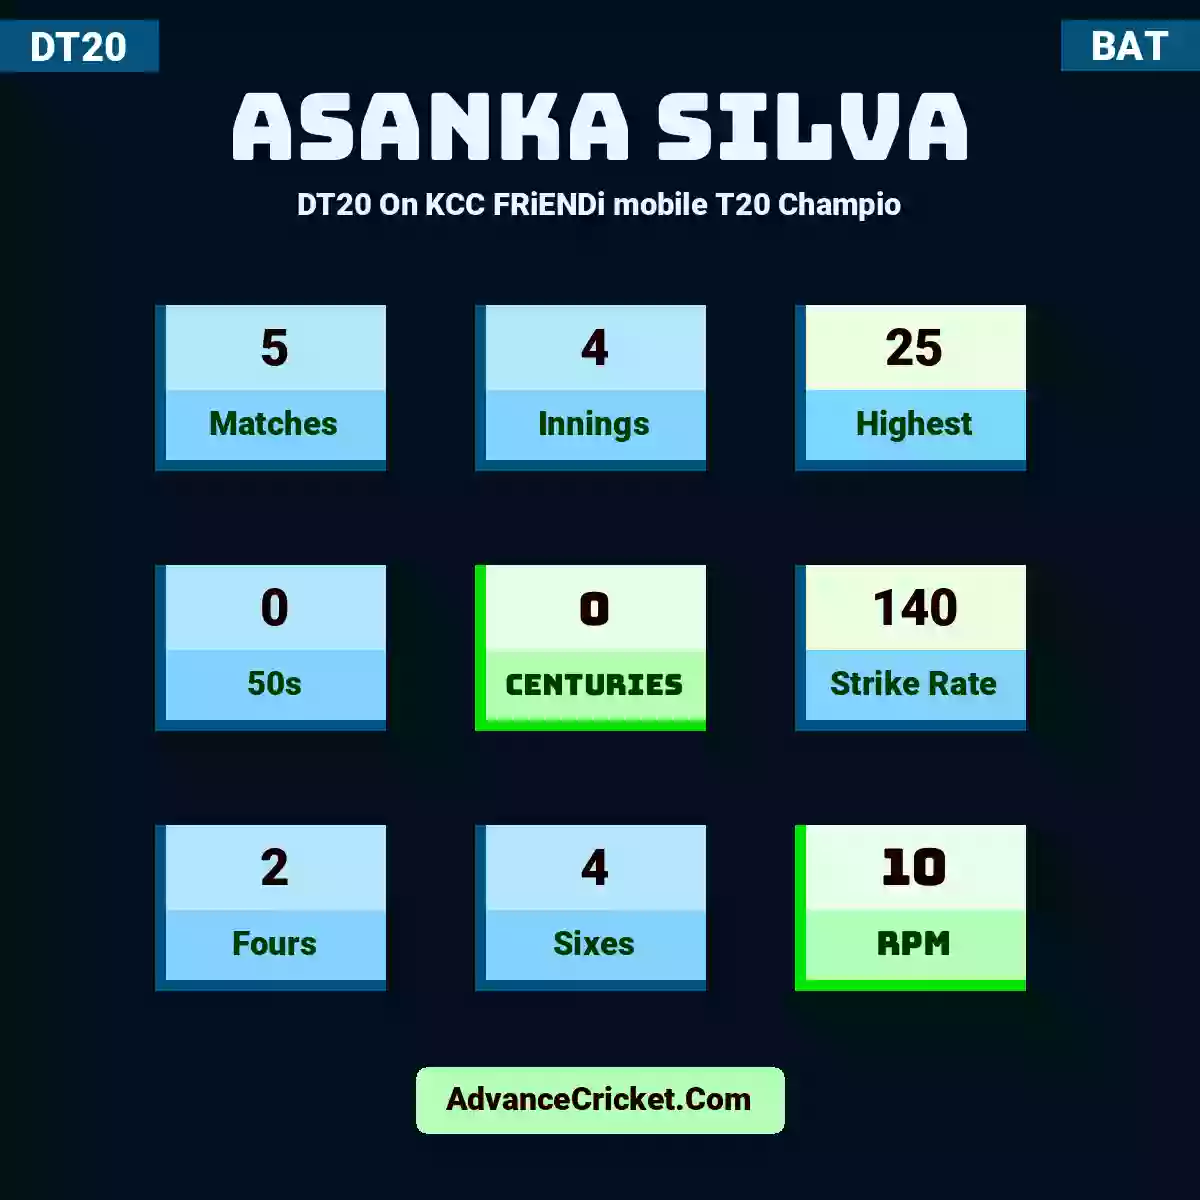 Asanka Silva DT20  On KCC FRiENDi mobile T20 Champio, Asanka Silva played 5 matches, scored 25 runs as highest, 0 half-centuries, and 0 centuries, with a strike rate of 140. A.Silva hit 2 fours and 4 sixes, with an RPM of 10.